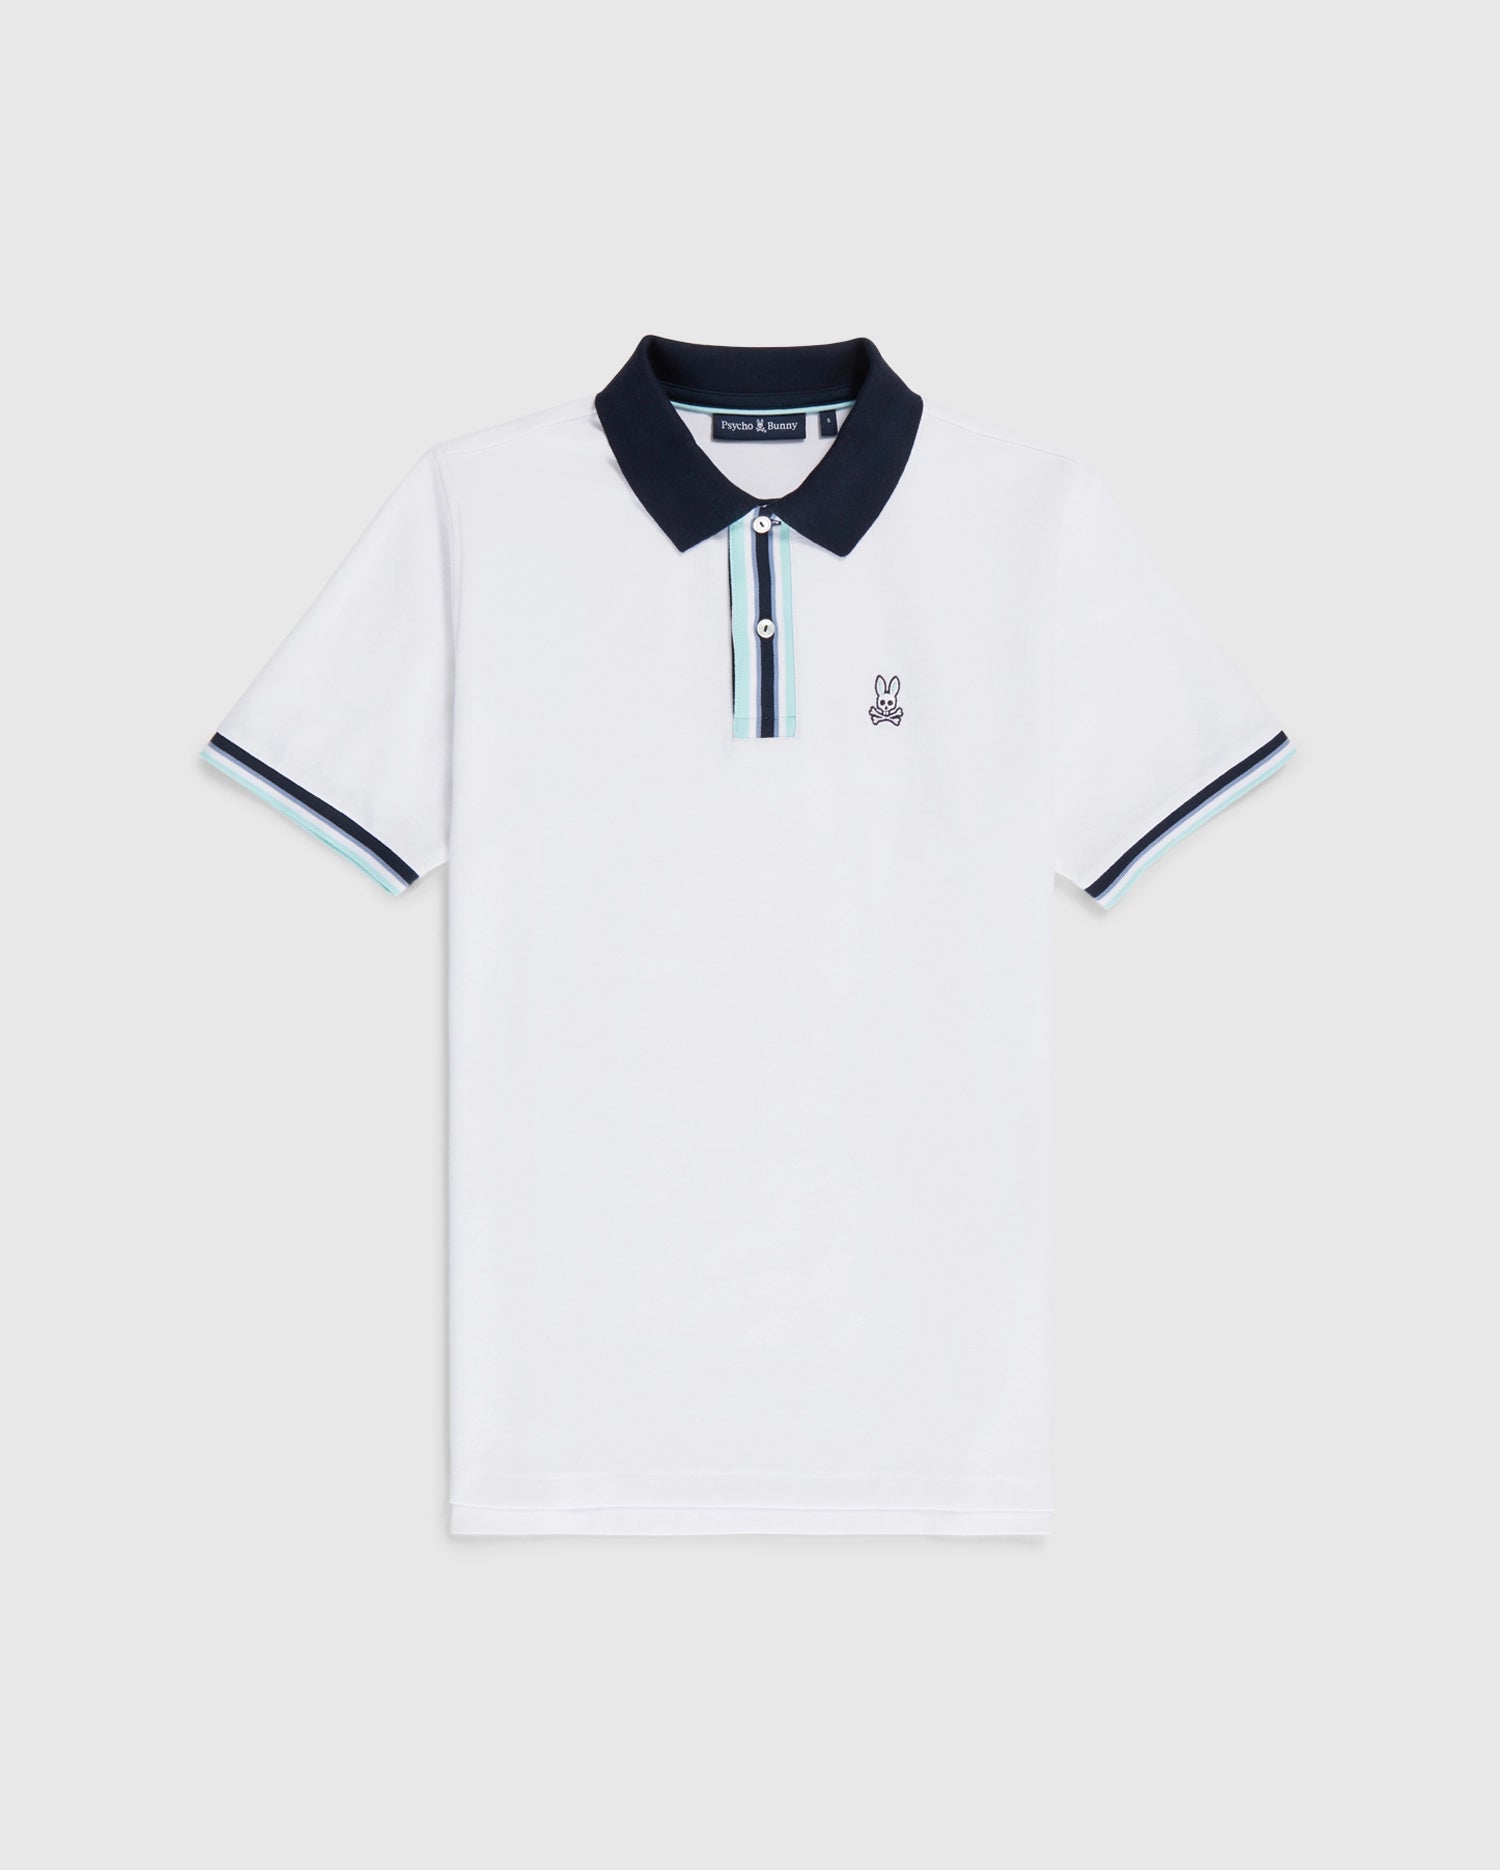 White Psycho Bunny Bloomington pique polo shirt with a navy blue collar, a small bunny logo on the left chest, and blue trim on the sleeves. The shirt is displayed against a plain background.